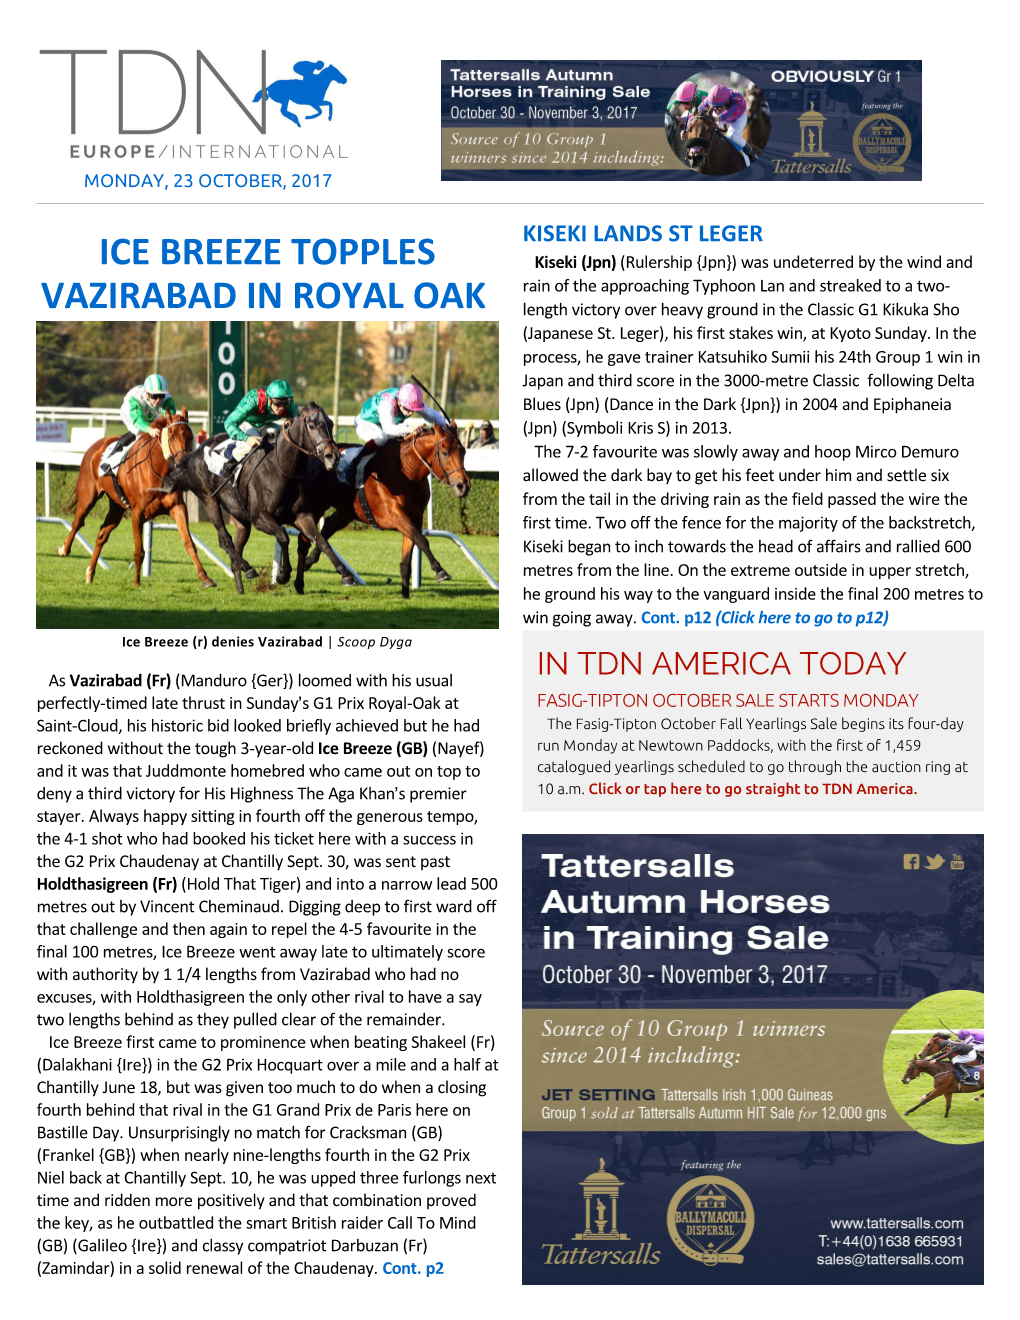 Ice Breeze Topples Vazirabad in Royal Oak Cont